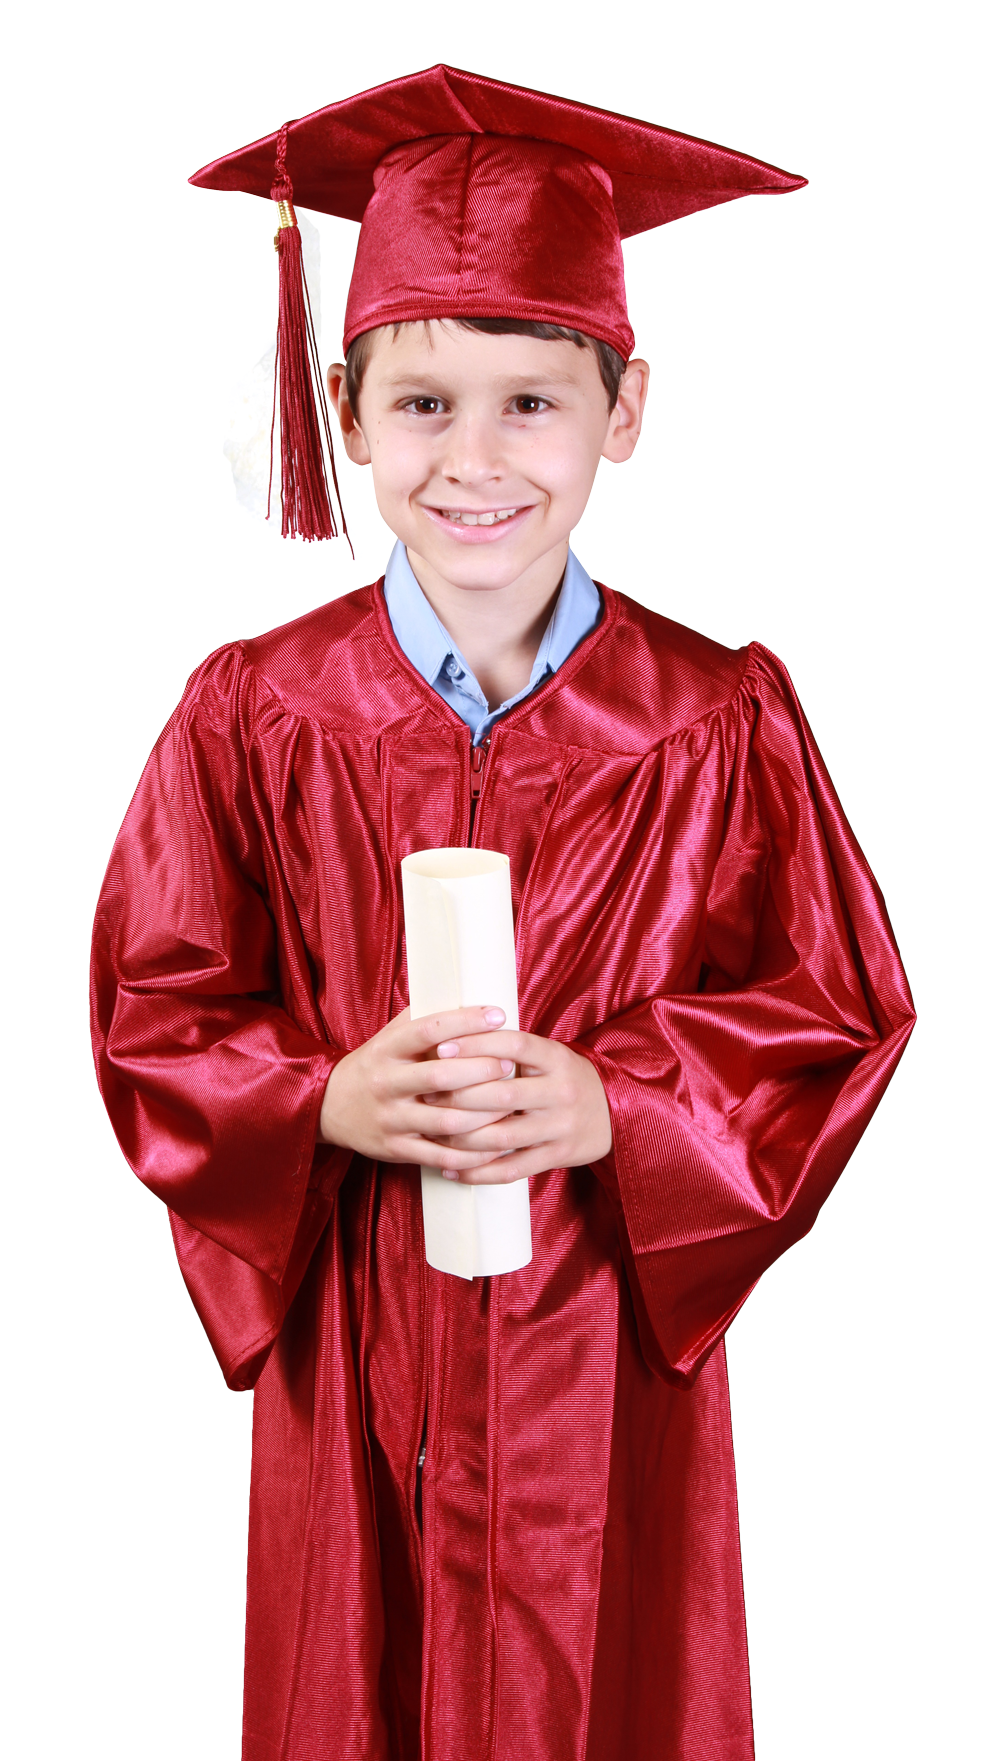 A Boy Wearing A Graduation Gown And Holding A Diploma